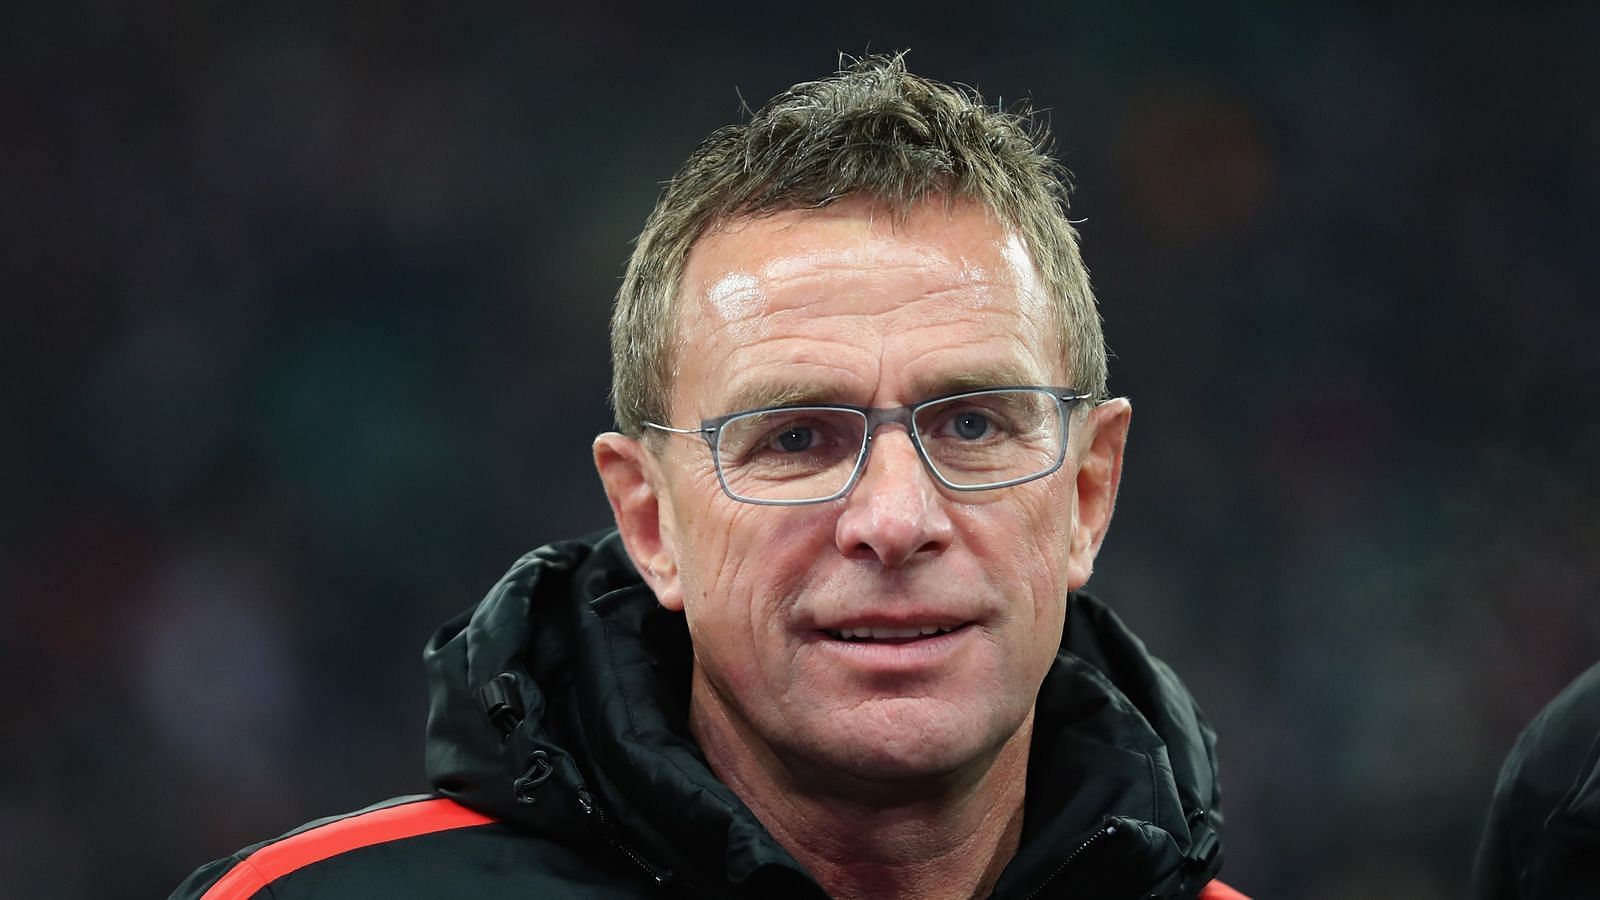 Ralf Rangnick will take charge of Manchester United. Image Credits: Sky Sports